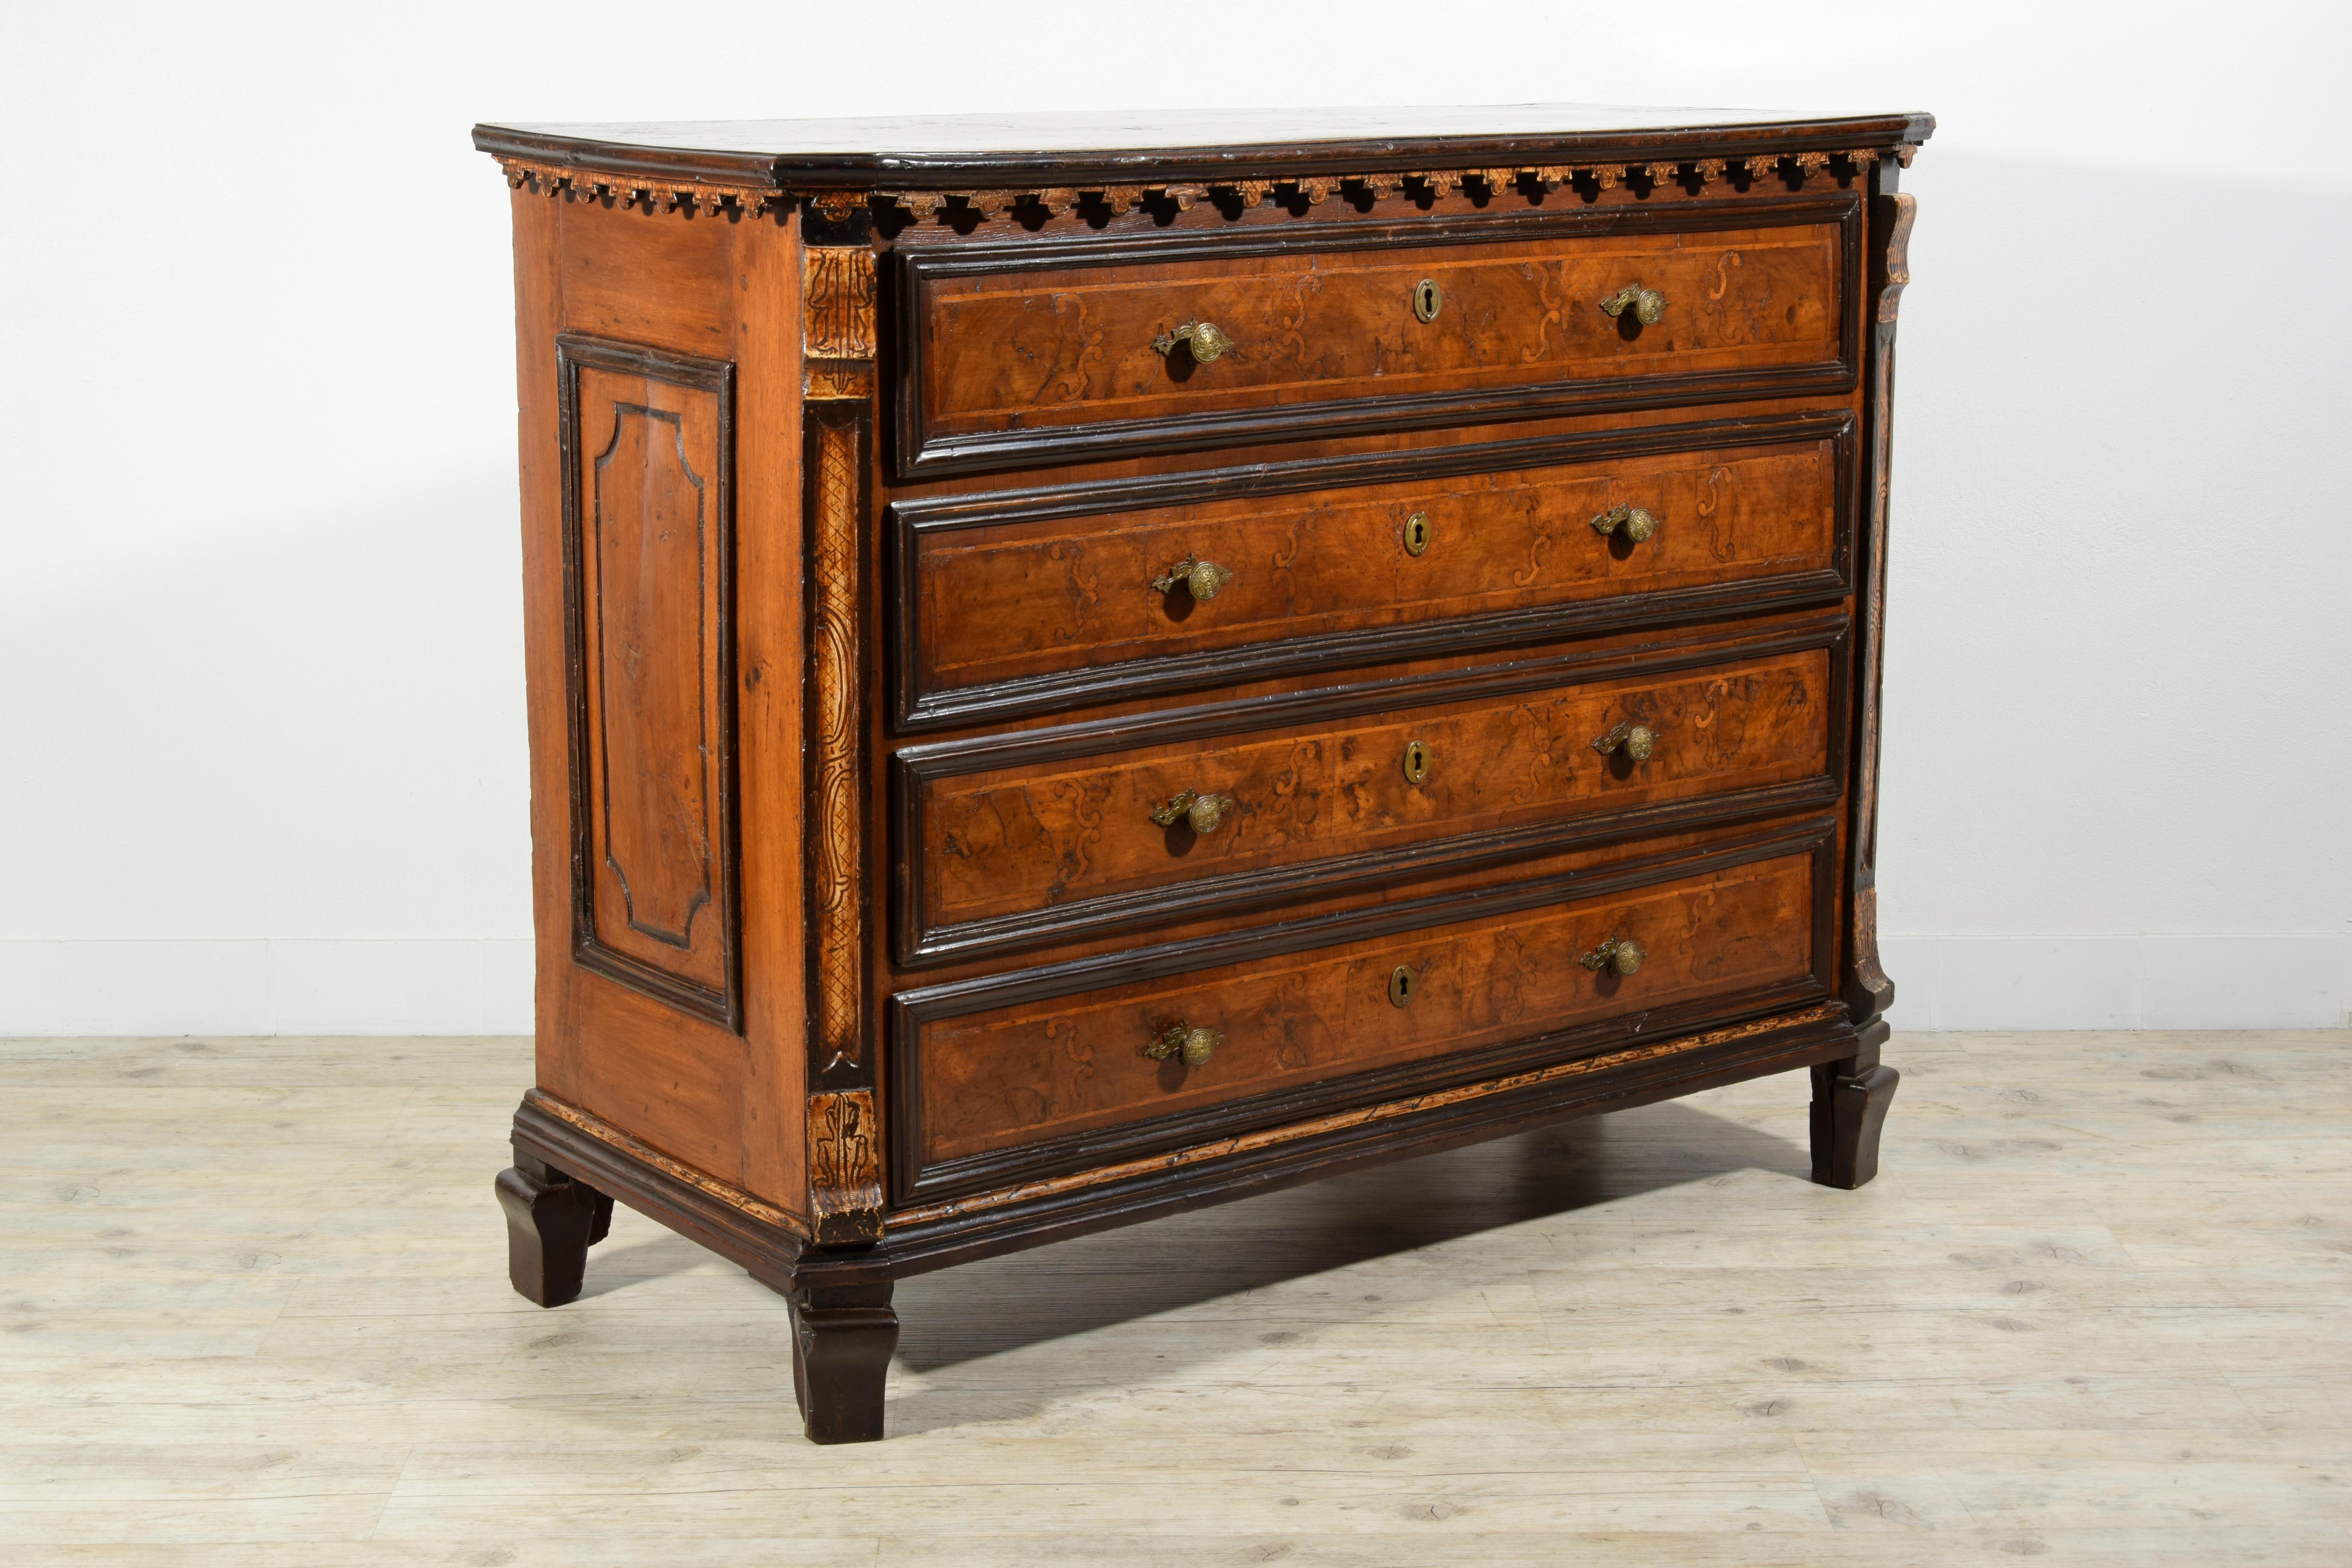 17th Century, Italian Baroque Walnut Chest of Drawers

This chest of drawers was made in Lombardy in the Baroque period at the end of the seventeenth century. The wooden structure is in solid walnut, veneered and inlaid with walnut briar and soft